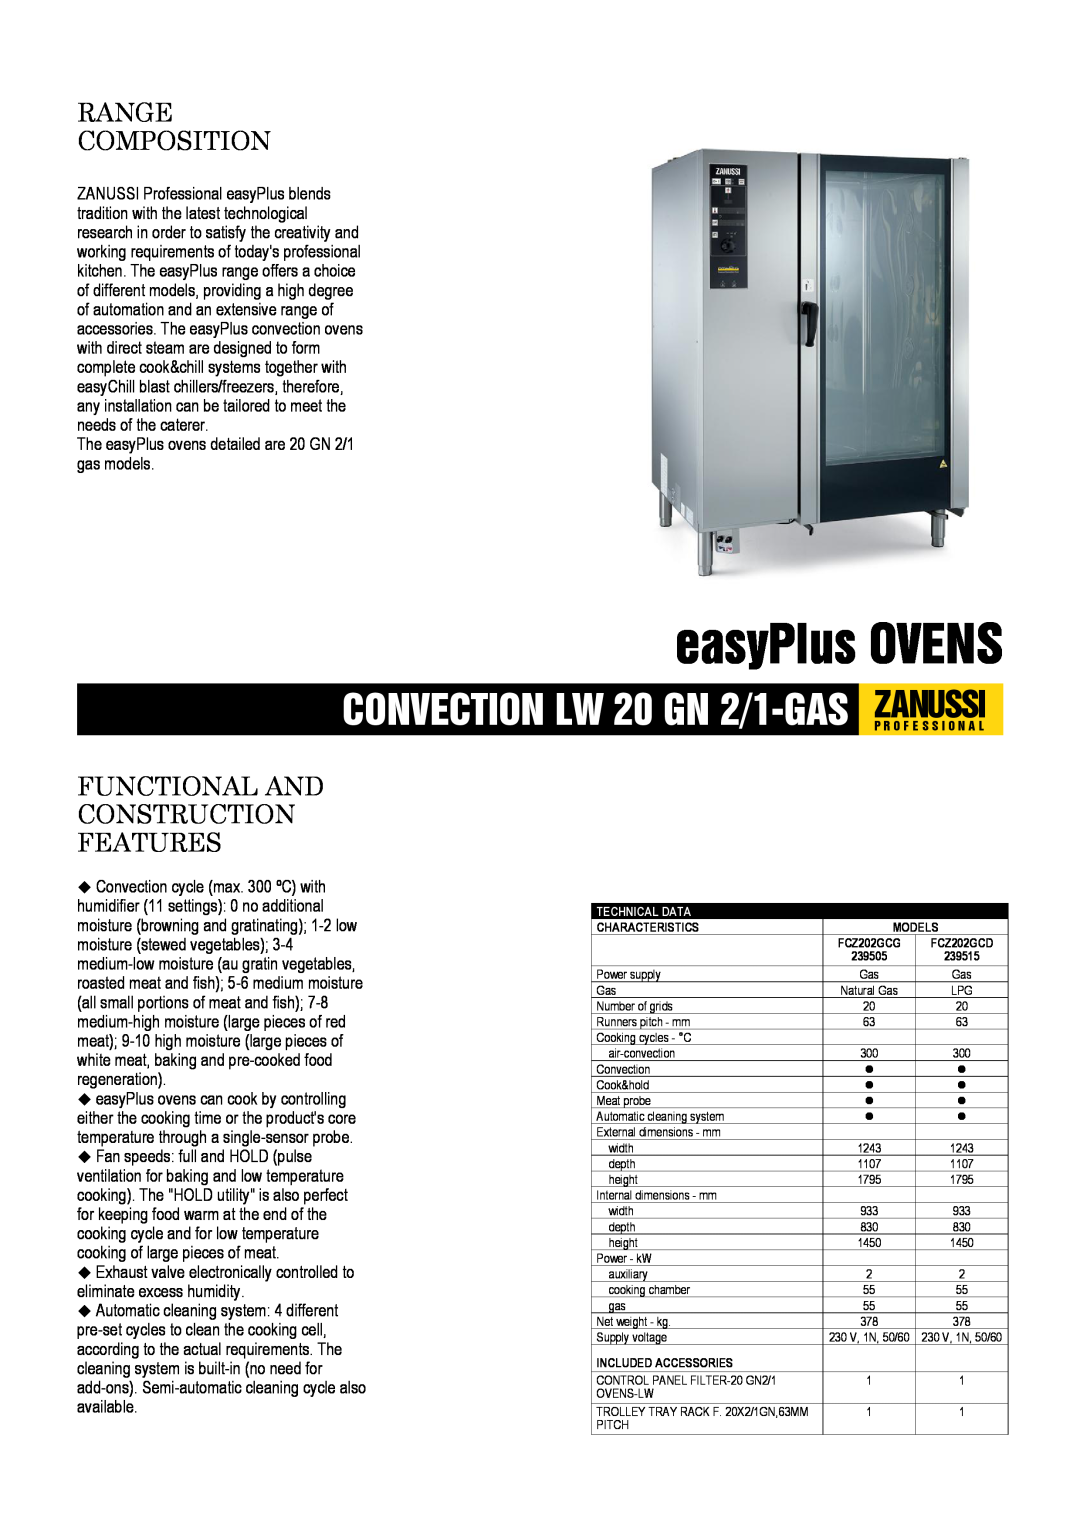 Zanussi 239515, 20 GN 2/1, FCZ202GCG dimensions easyPlus OVENS, Range Composition, Functional And Construction Features 